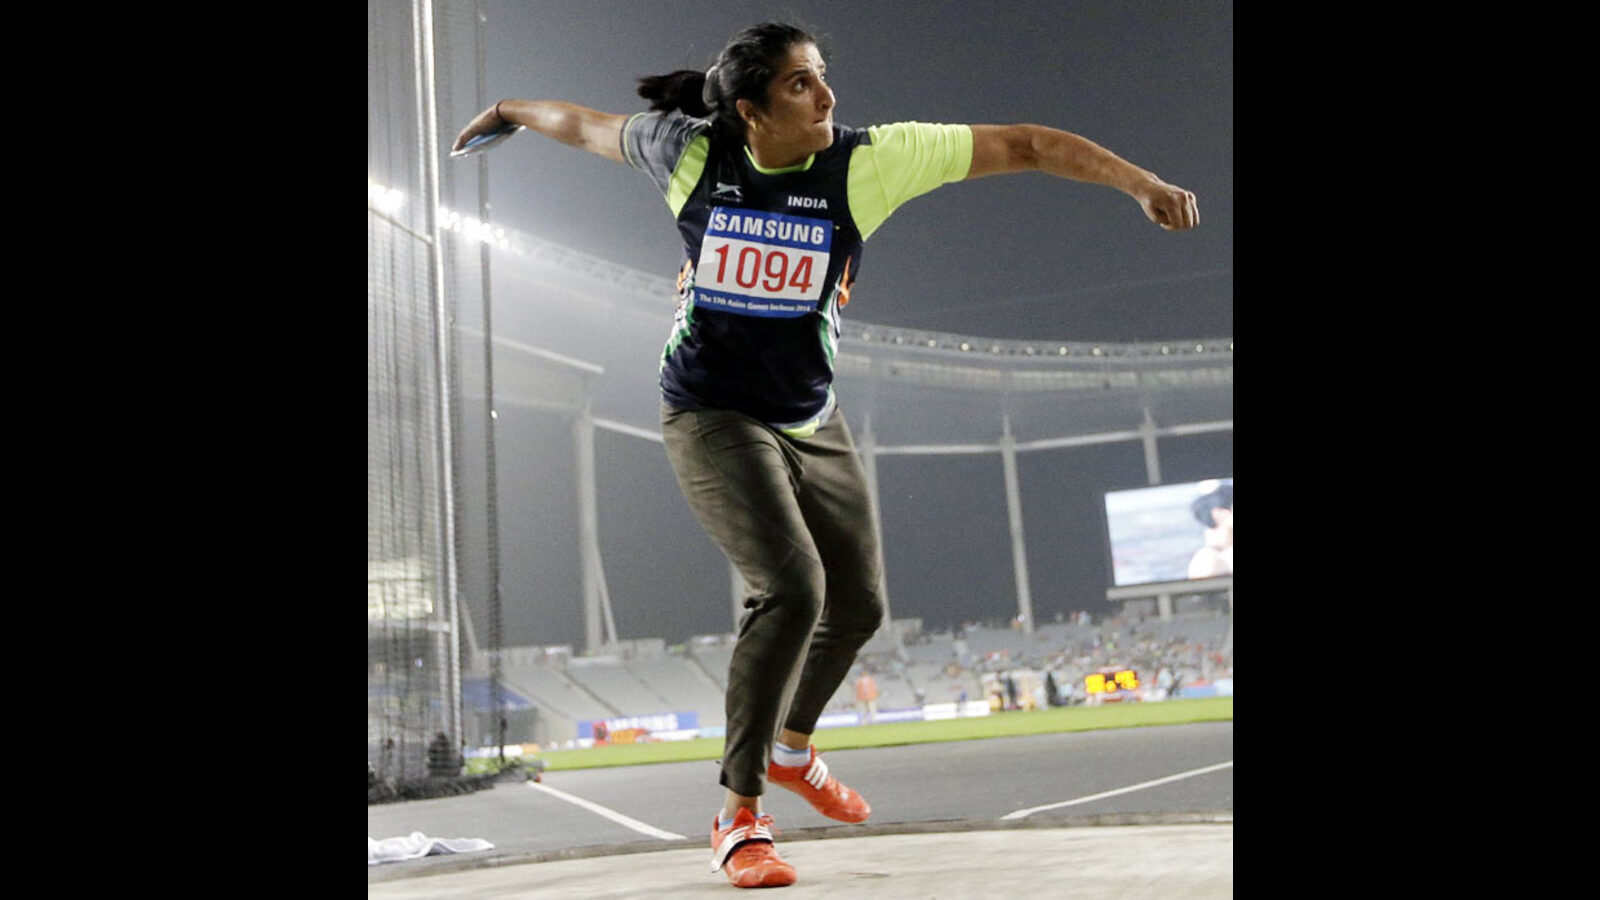 ‘Bahu’ Seema Punia to guide UP’s cost in CWG